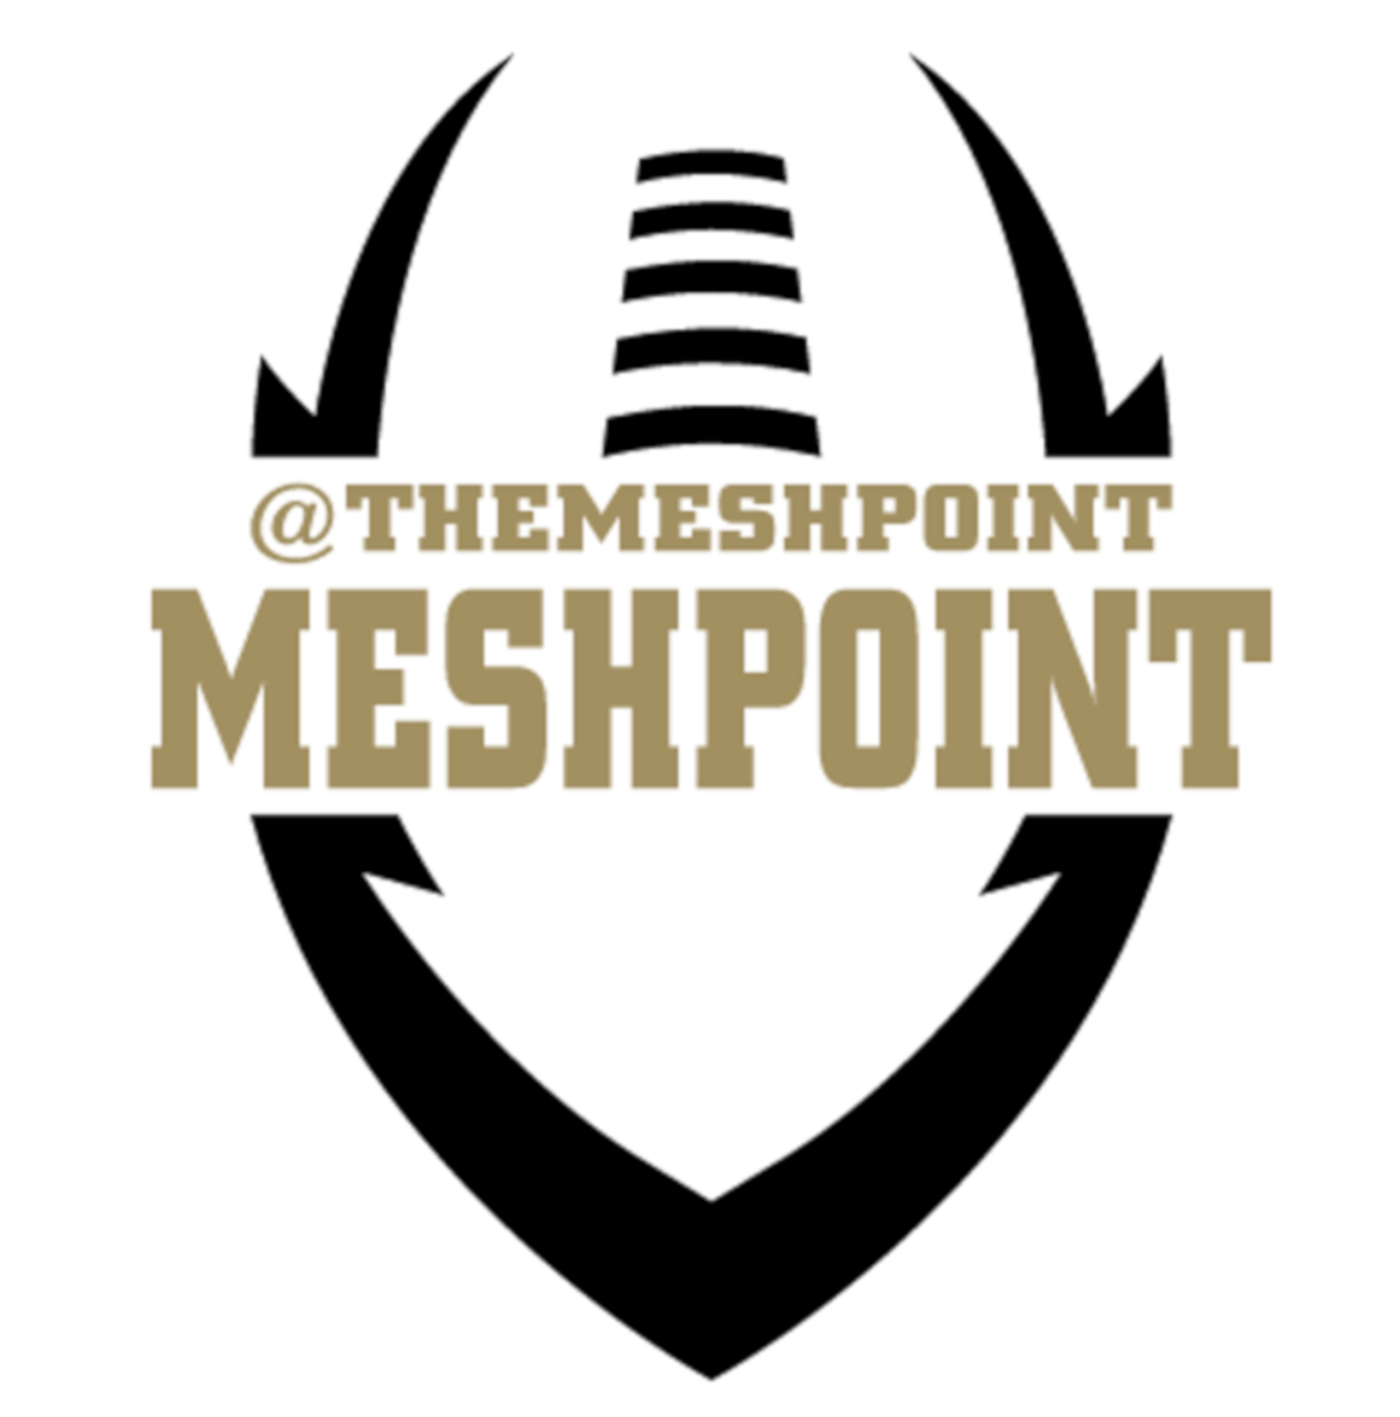 Meshpoint Podcast Season 1 Episode #3 with Rob Zeitman Current Head Football Coach at Jenison High School and former College OL Coach at Kent State and Ferris State